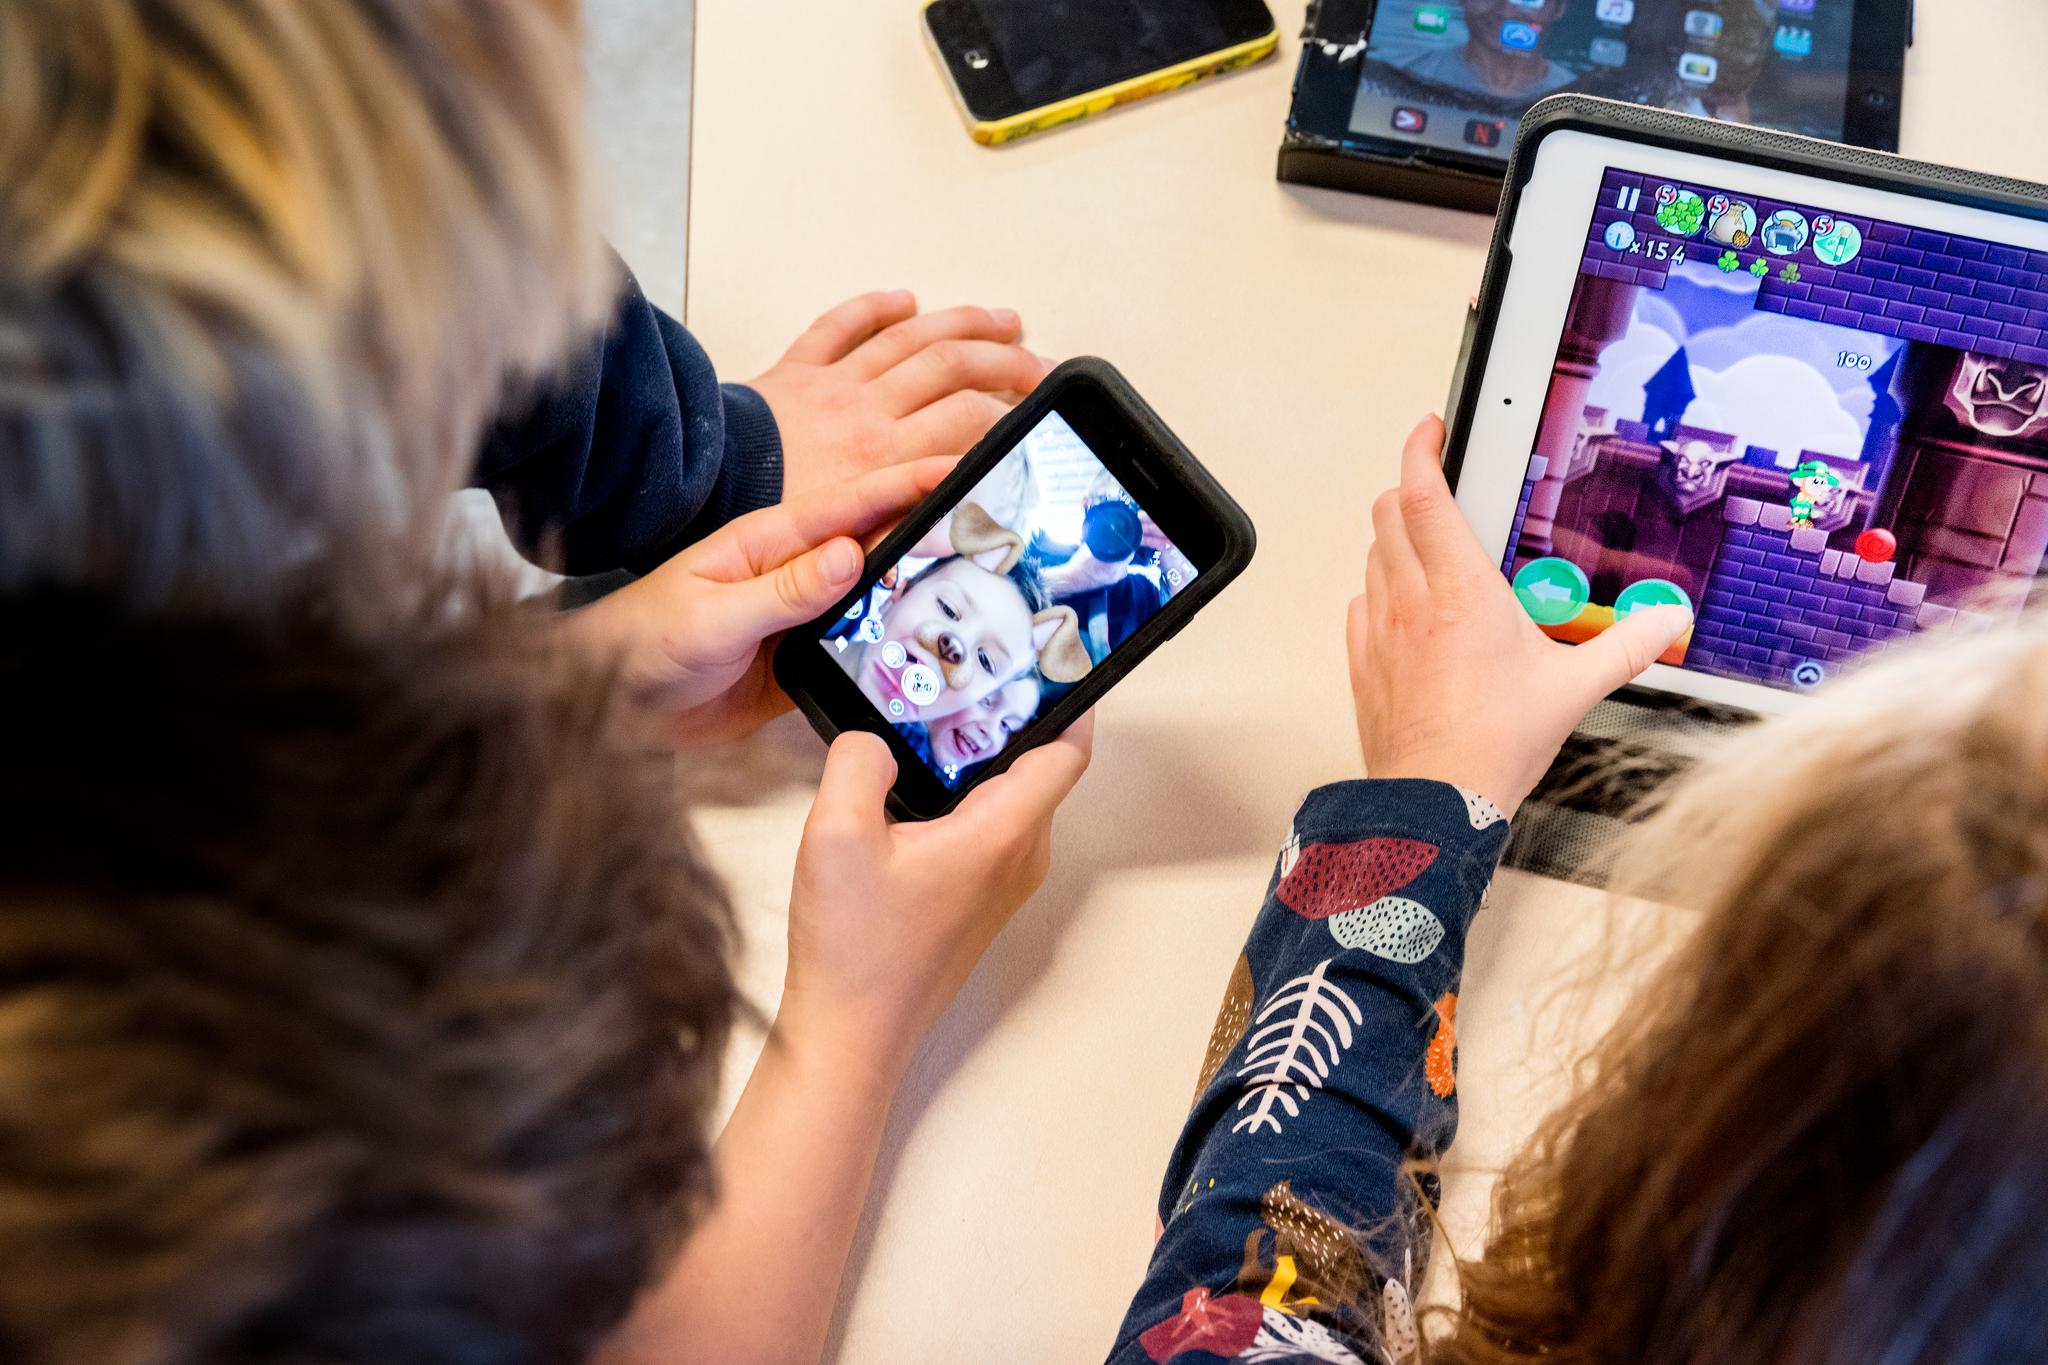 Norway’s Education Minister Cracks Down on Digital Tools in Schools as Student Learning Declines